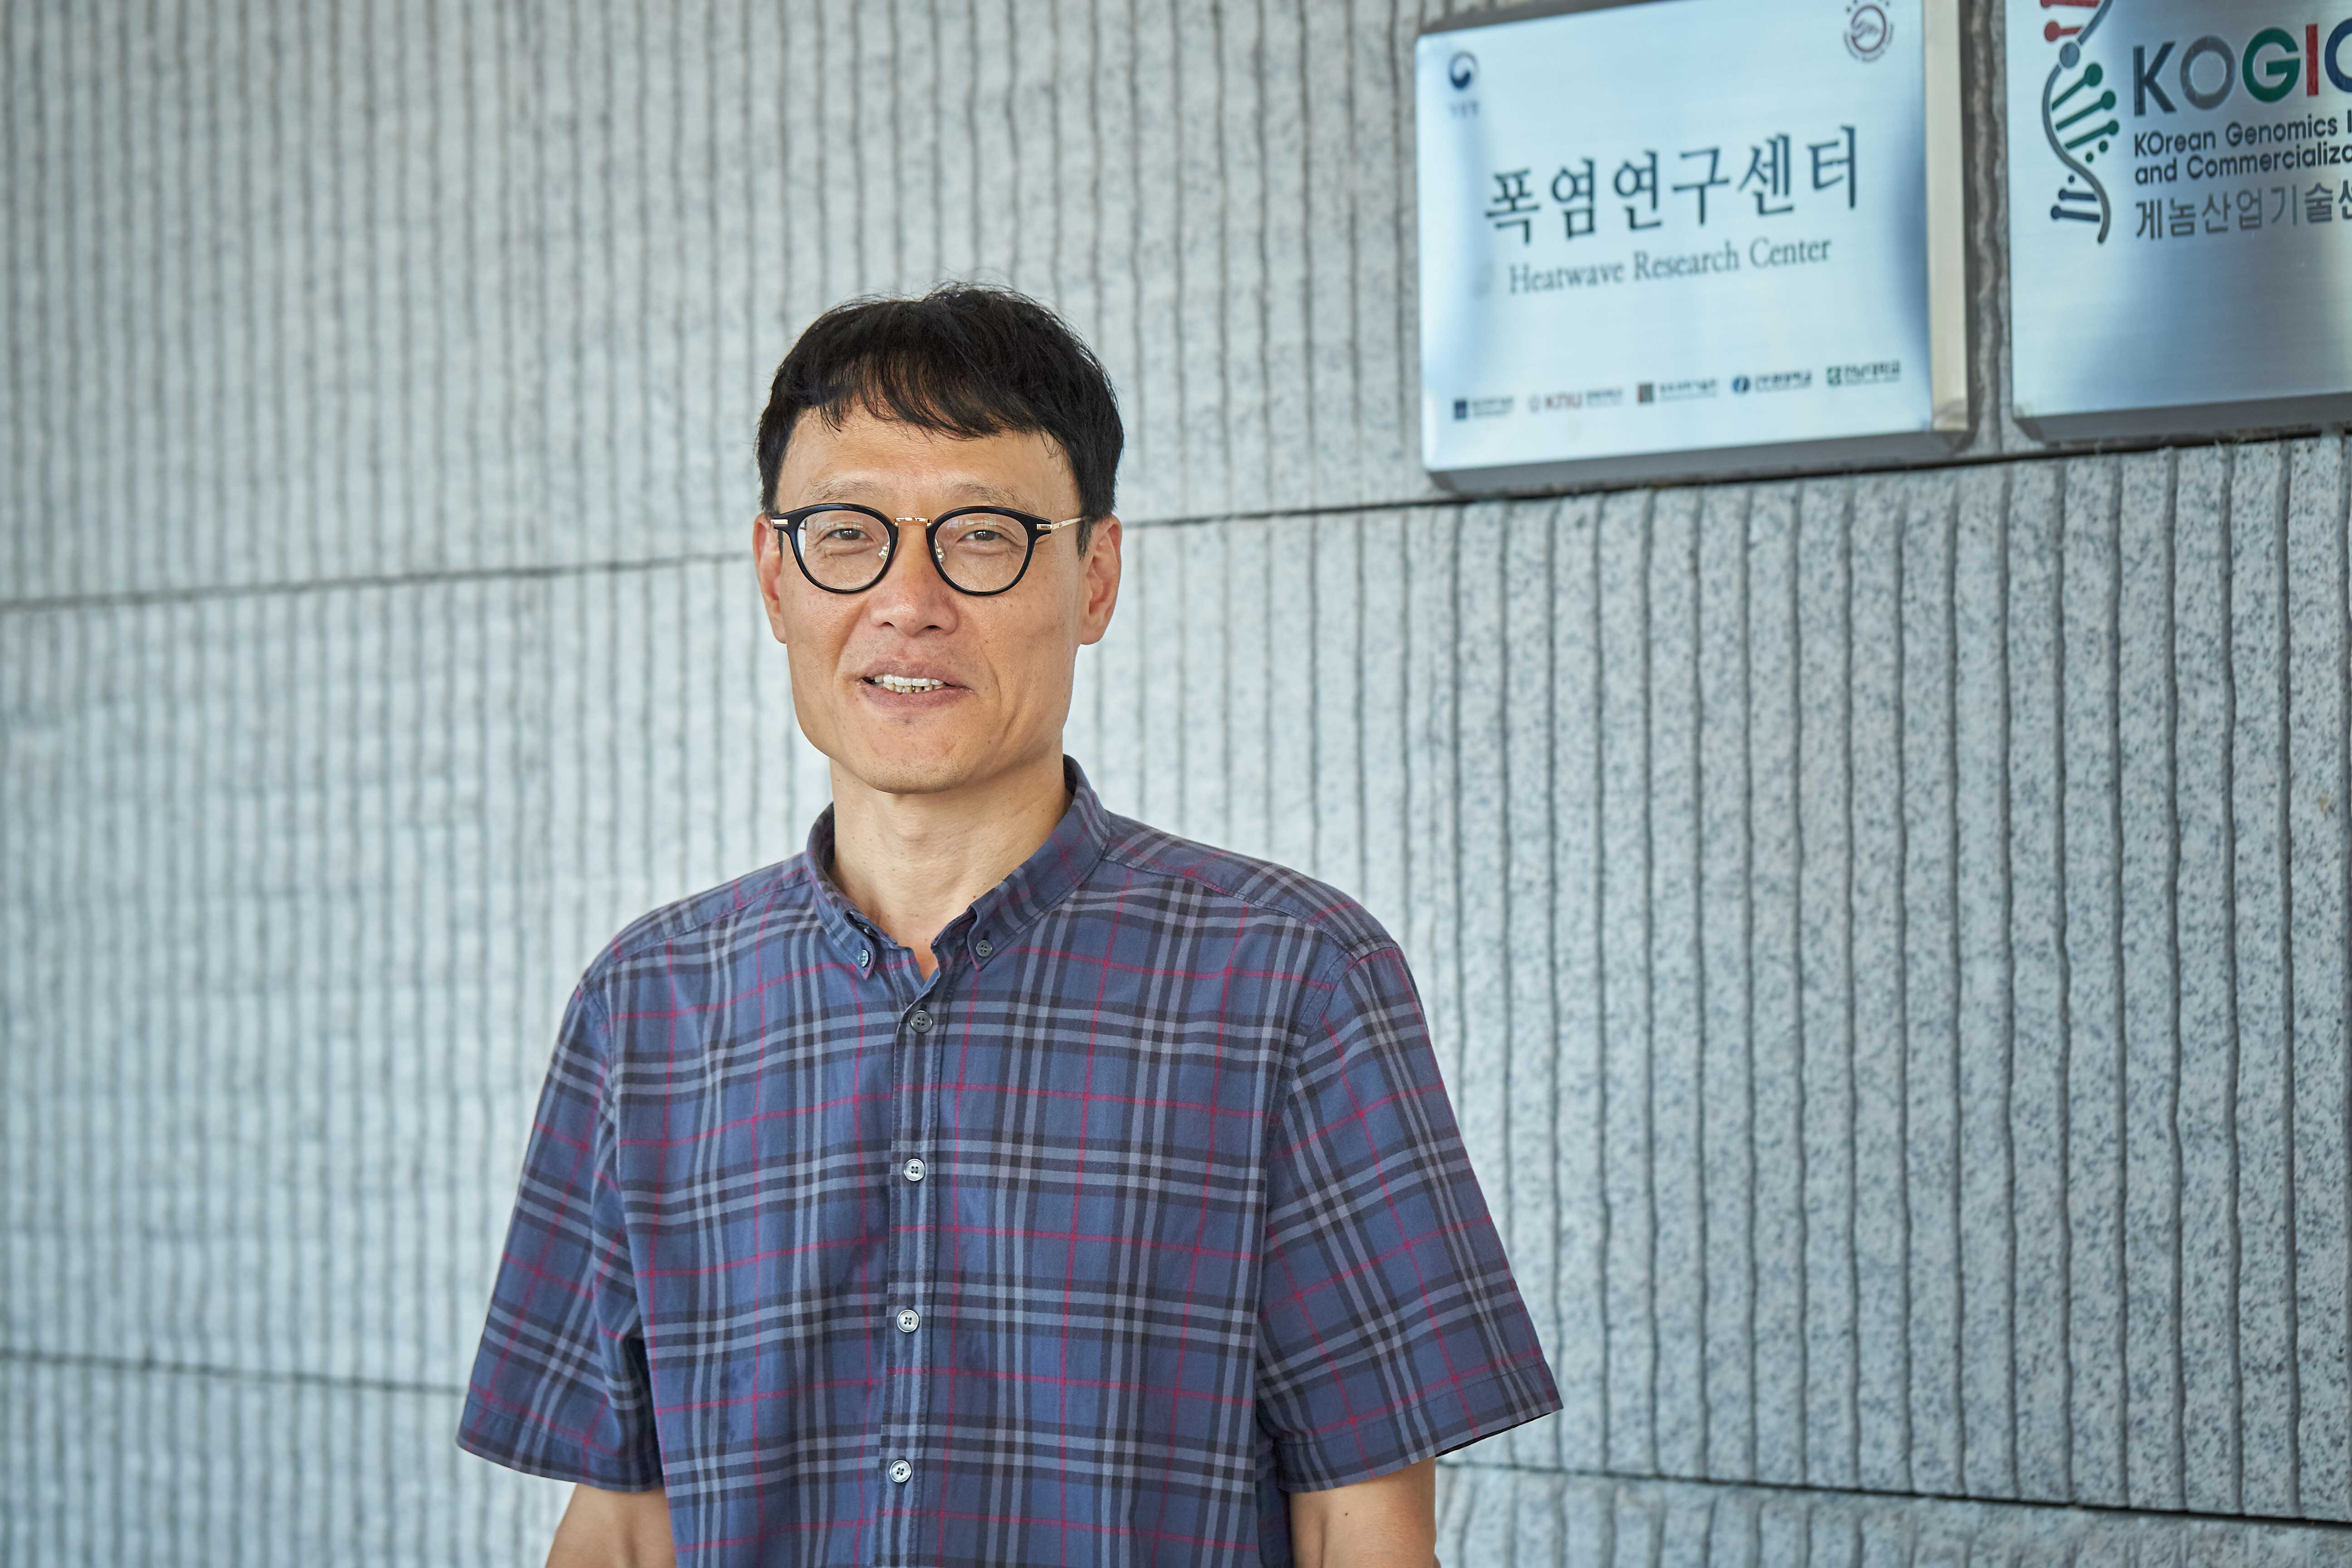 Professor Myung-In Lee (Dept. of CUEEn) is leading the Heatwave Research Center, which opened in 2017, at UNIST.